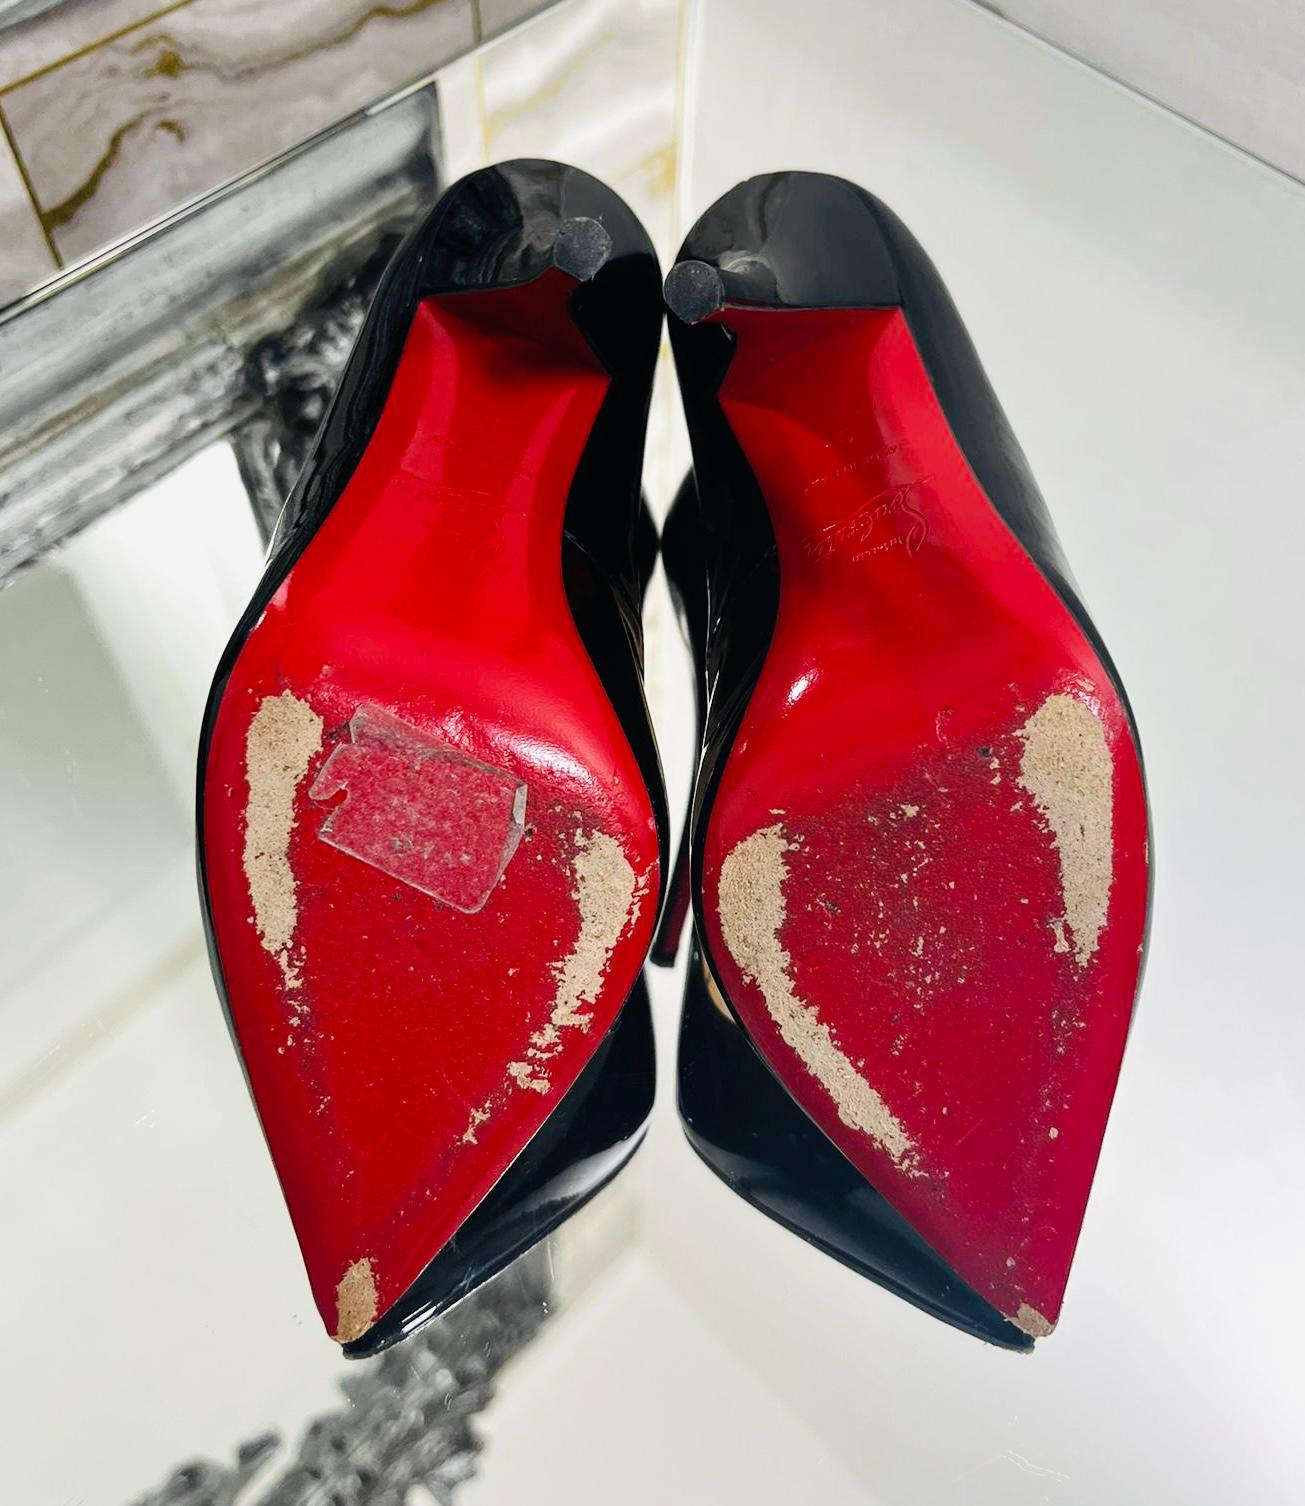 Christian Louboutin 100 Patent Leather Heels In Excellent Condition For Sale In London, GB